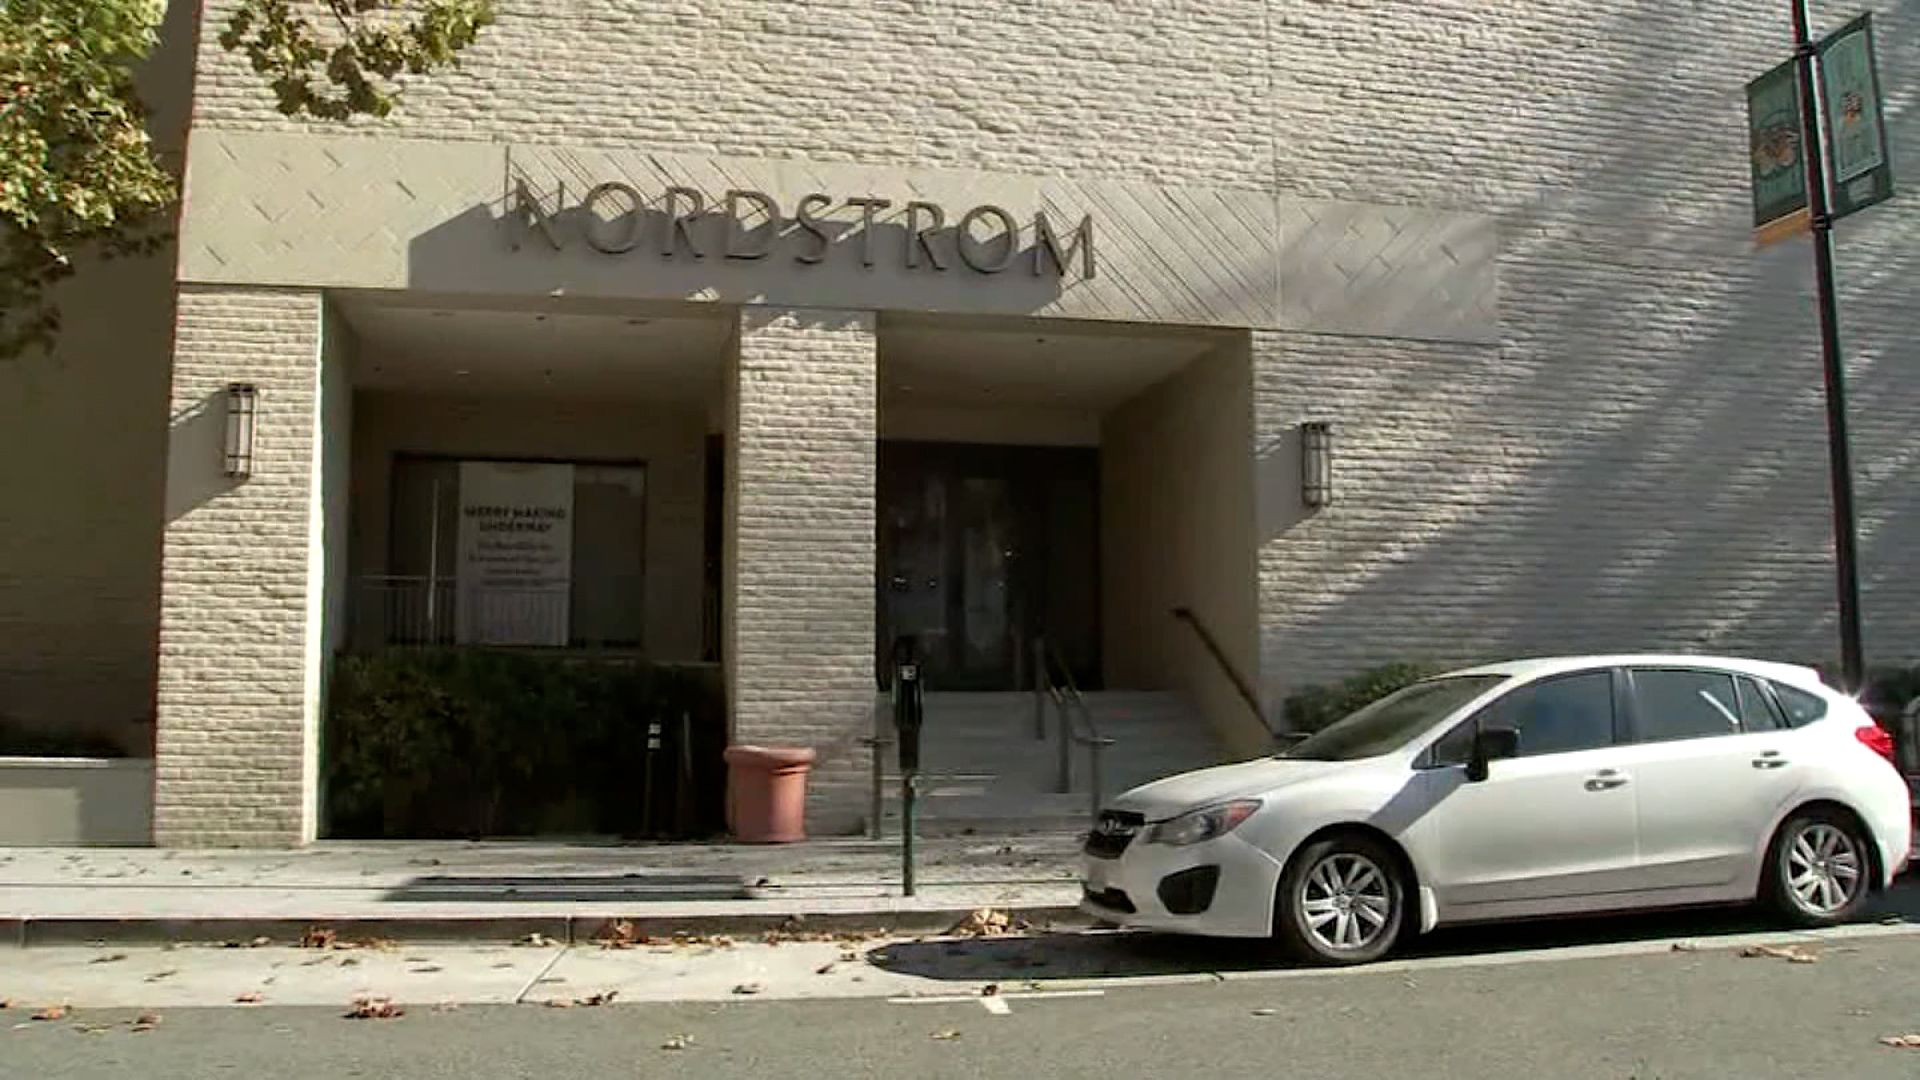 Gang of 80 thieves ransacks California Nordstrom store in